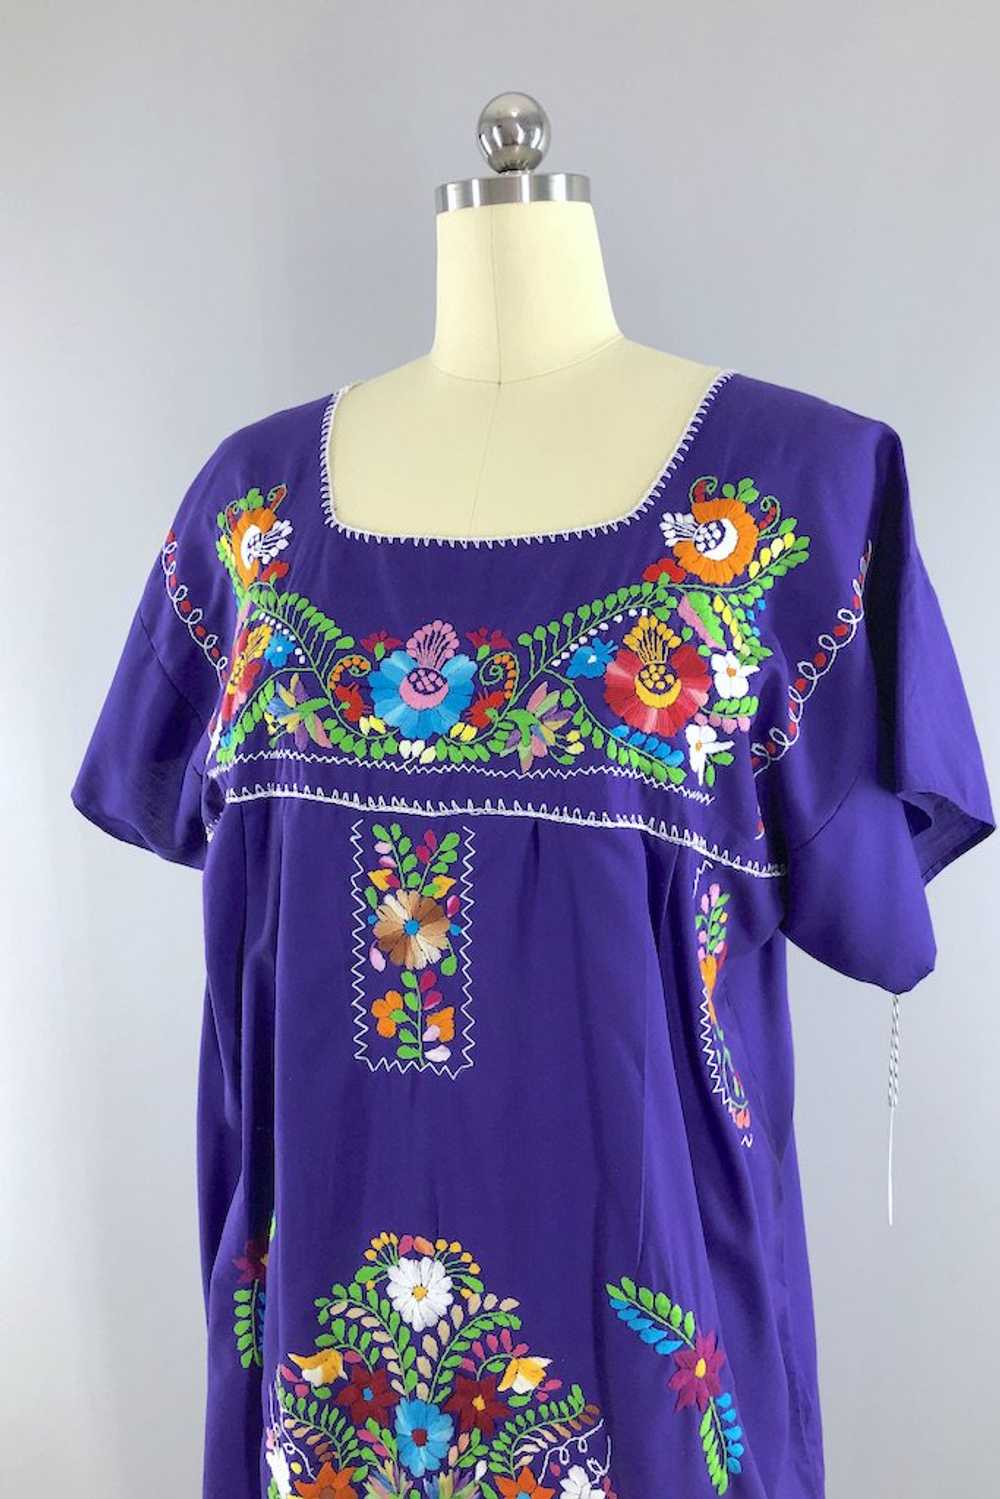 Vintage Embroidered Mexican Dress - image 2